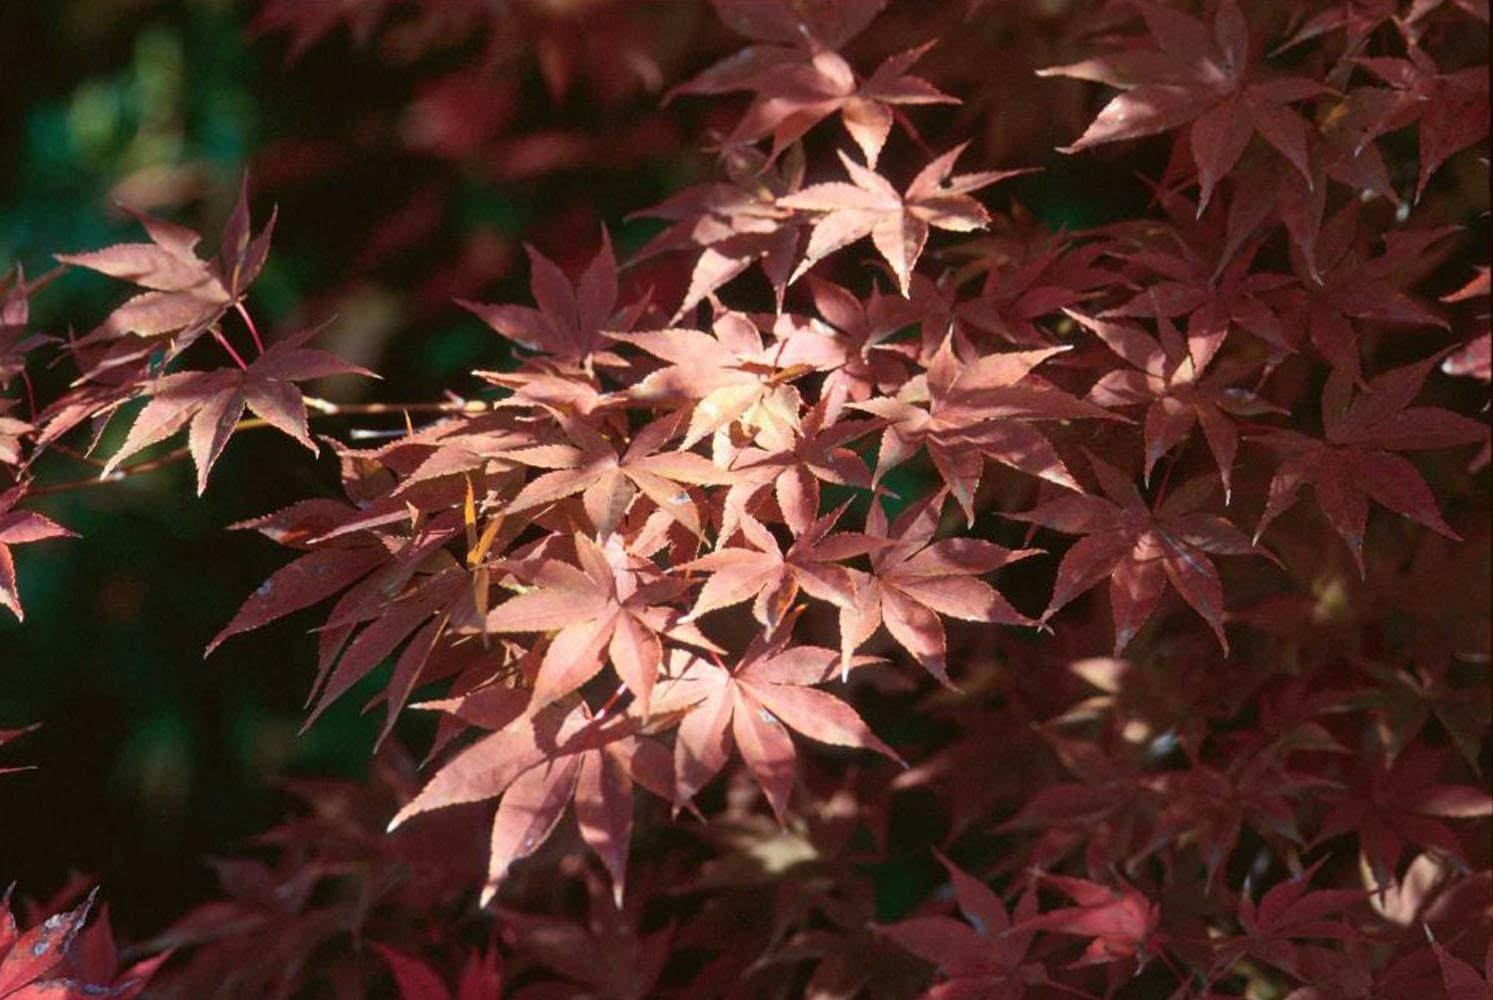 Fall is a great time to plant Japanese maple trees. Bloodgood, like the one pictured here, is a popular selection and also a Mississippi Medallion award winner.